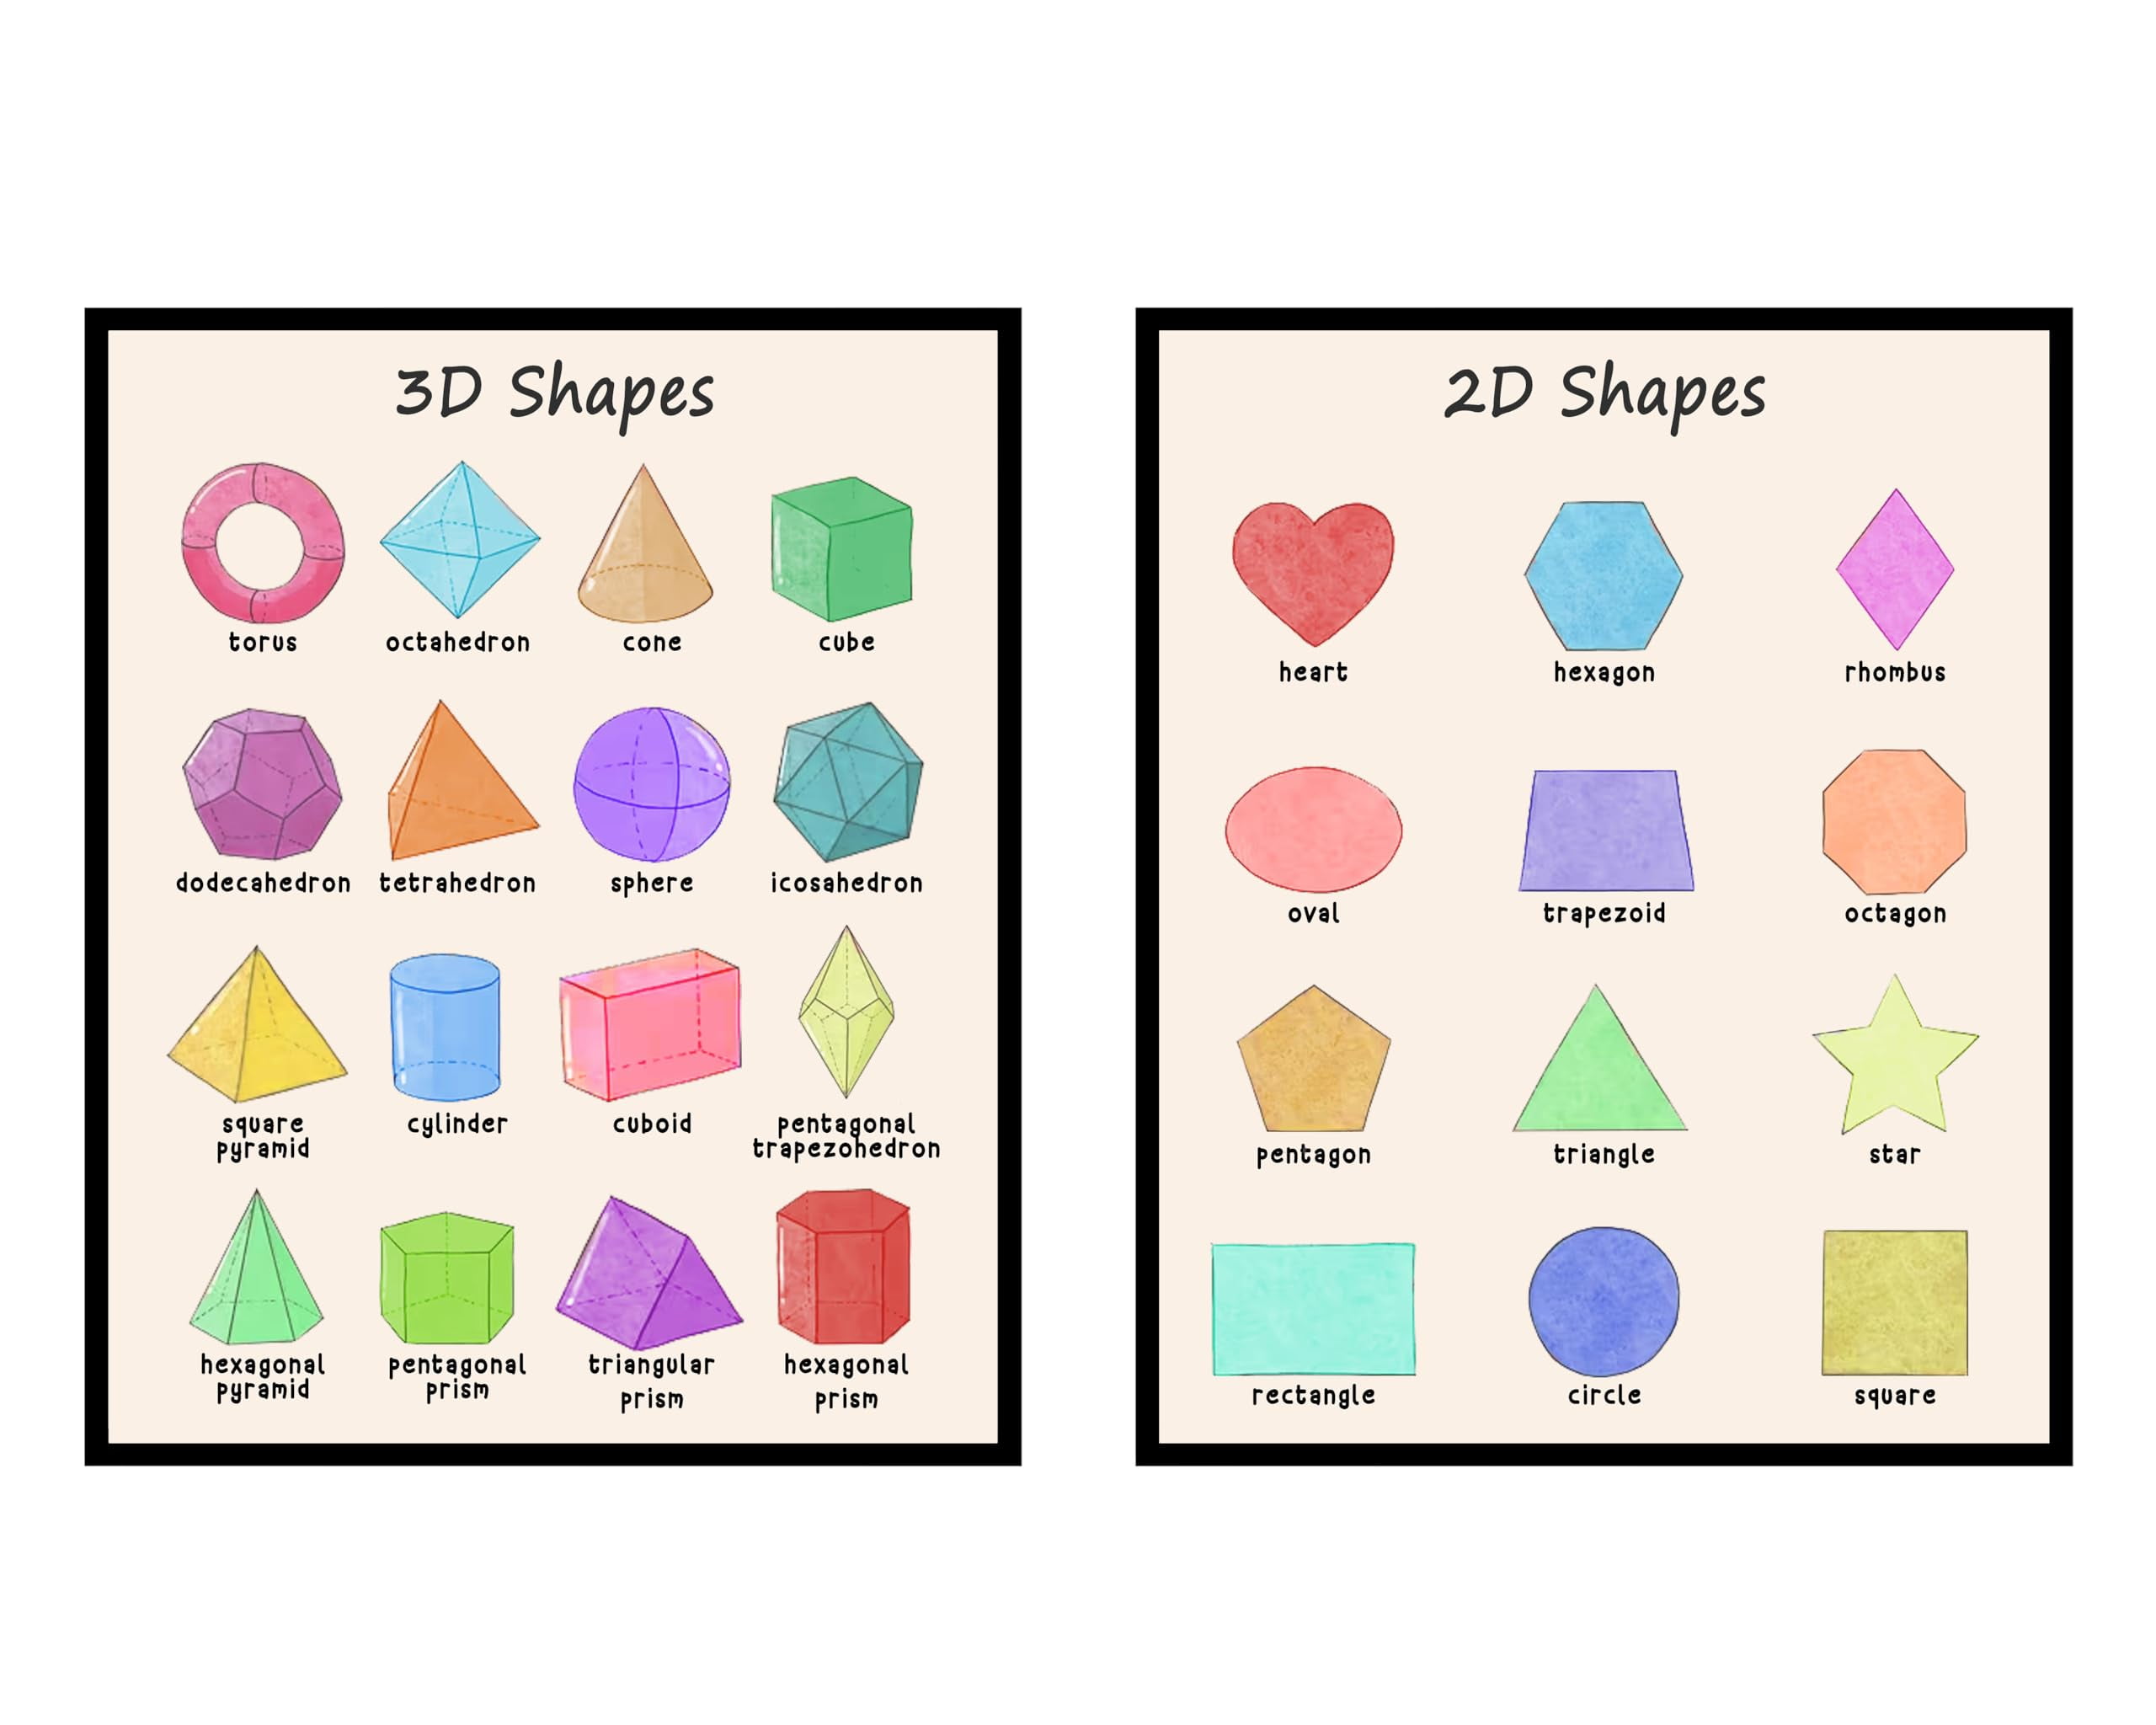 Drawing 3D Shapes Educational Resources K12 Learning, Visual Arts